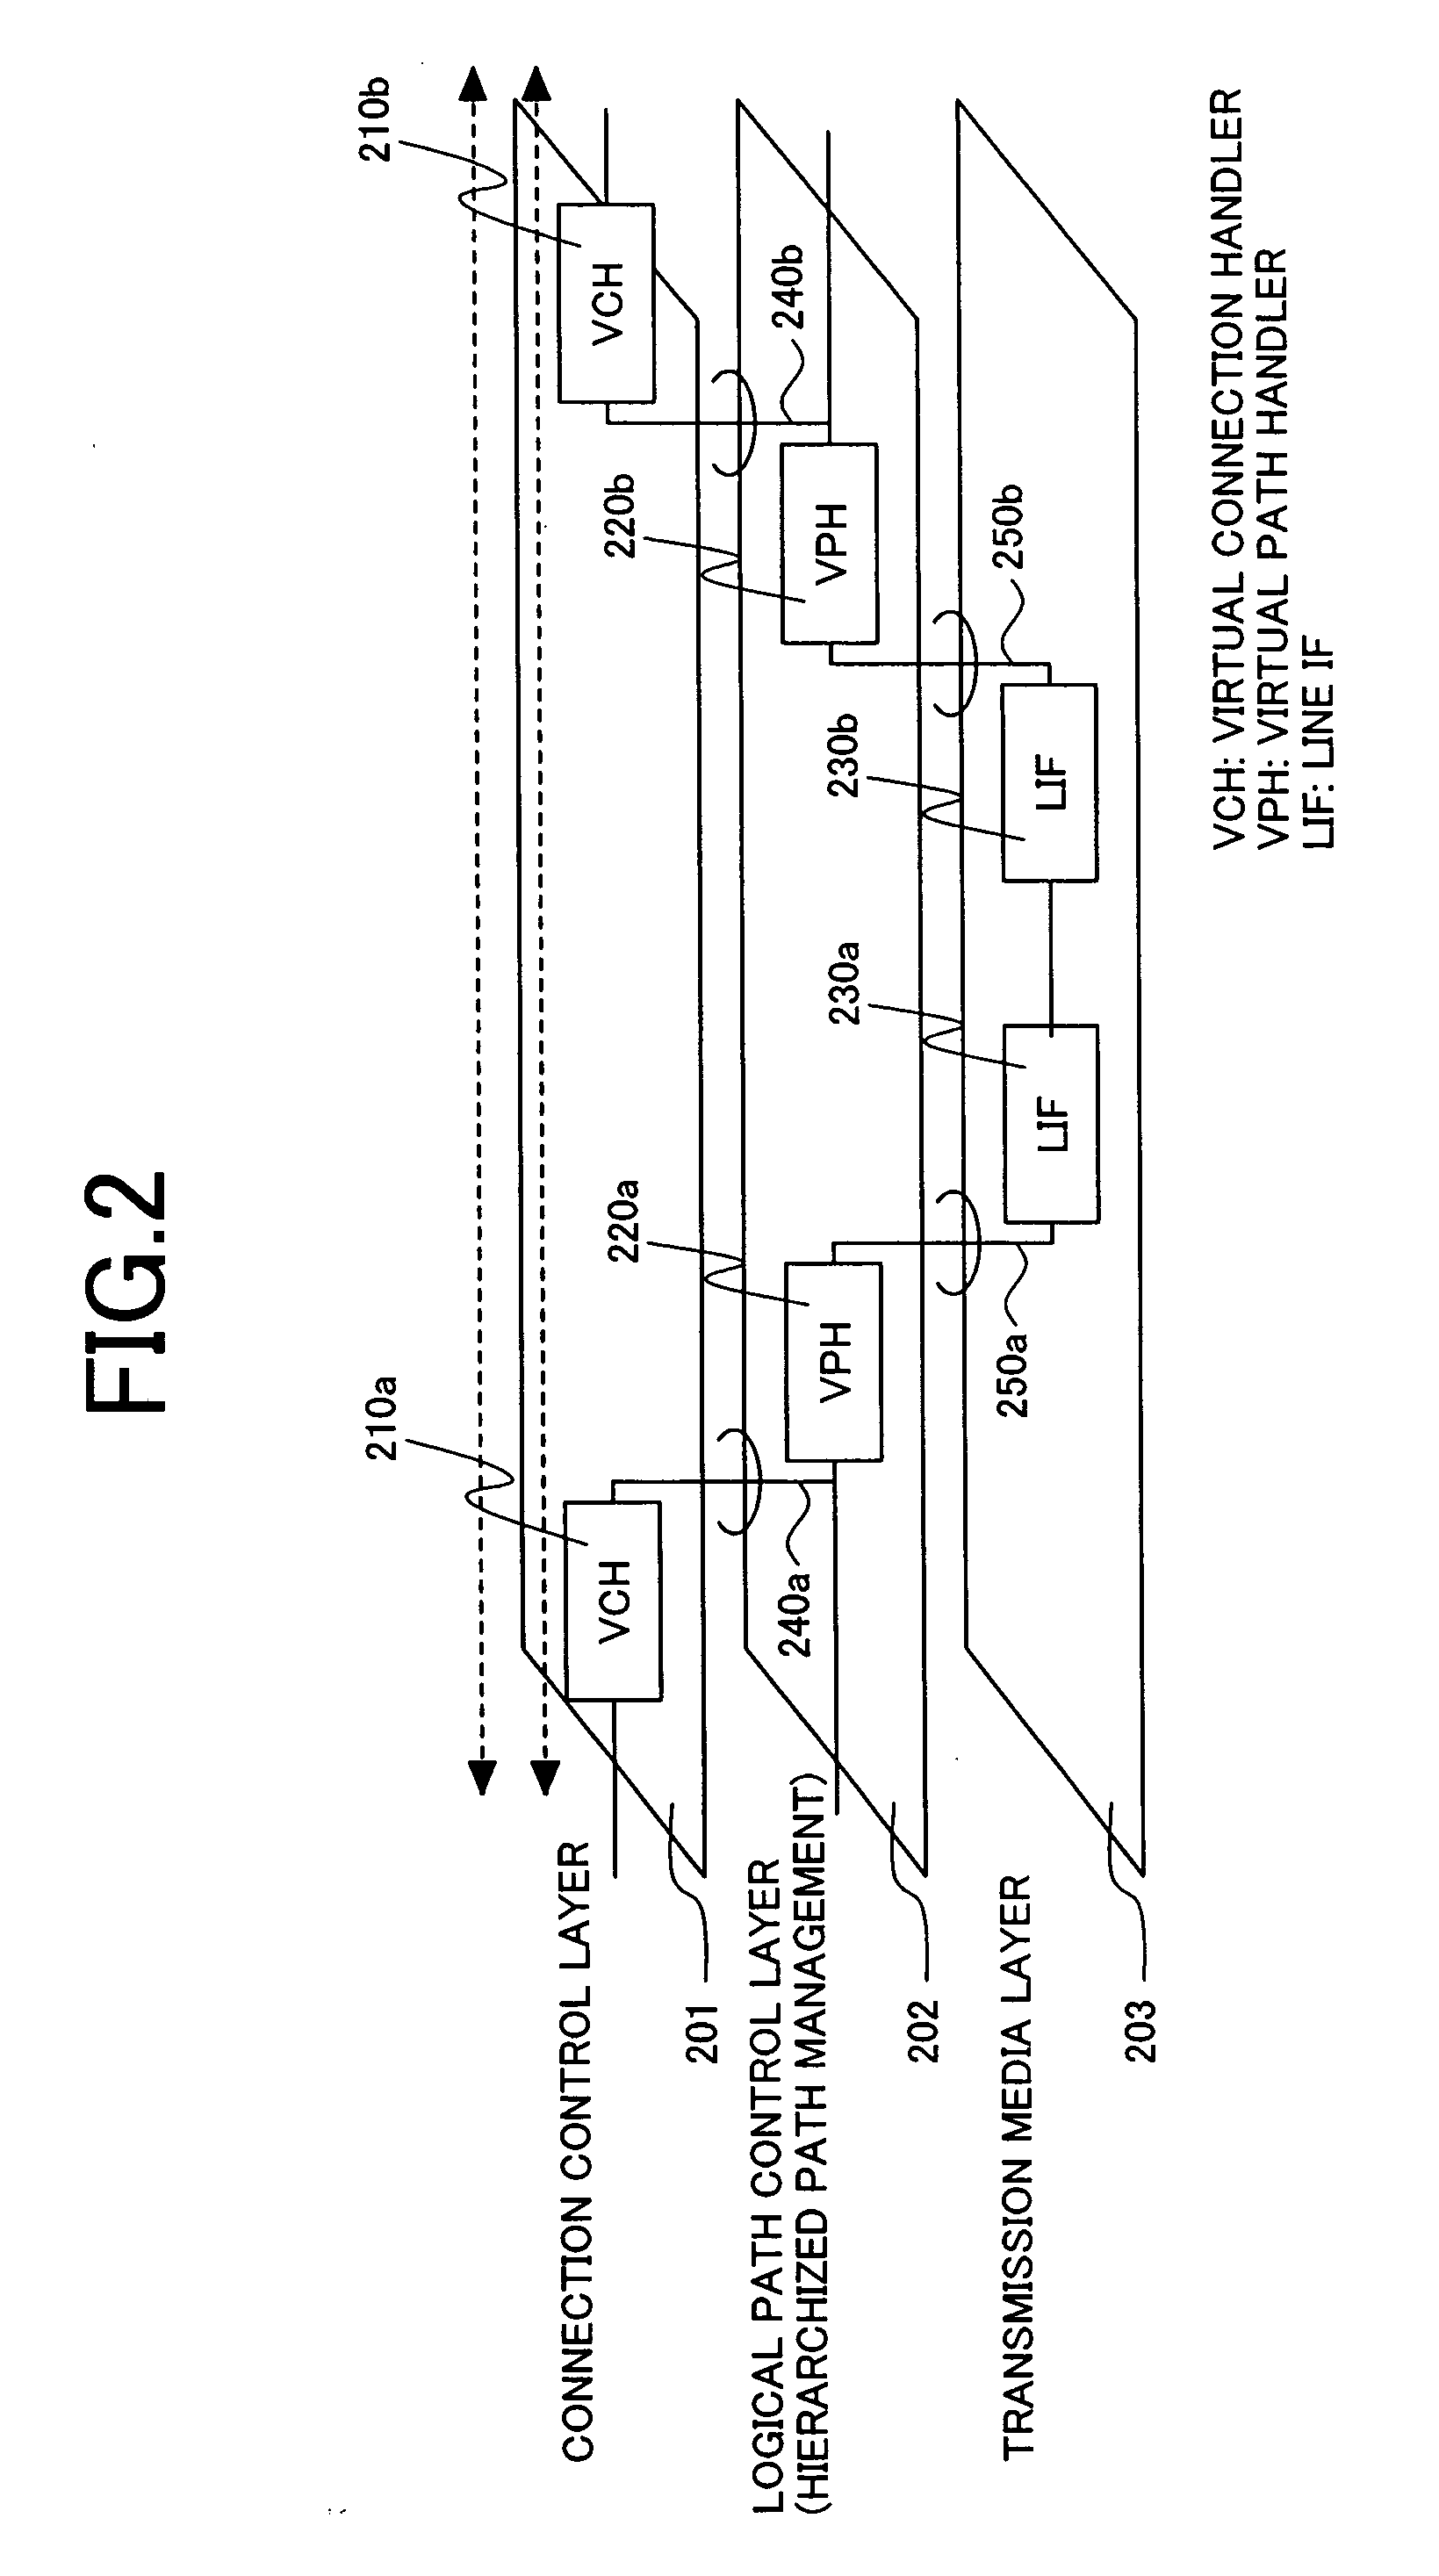 System apparatus and method for interconnecting TDM and frame/packet communication networks